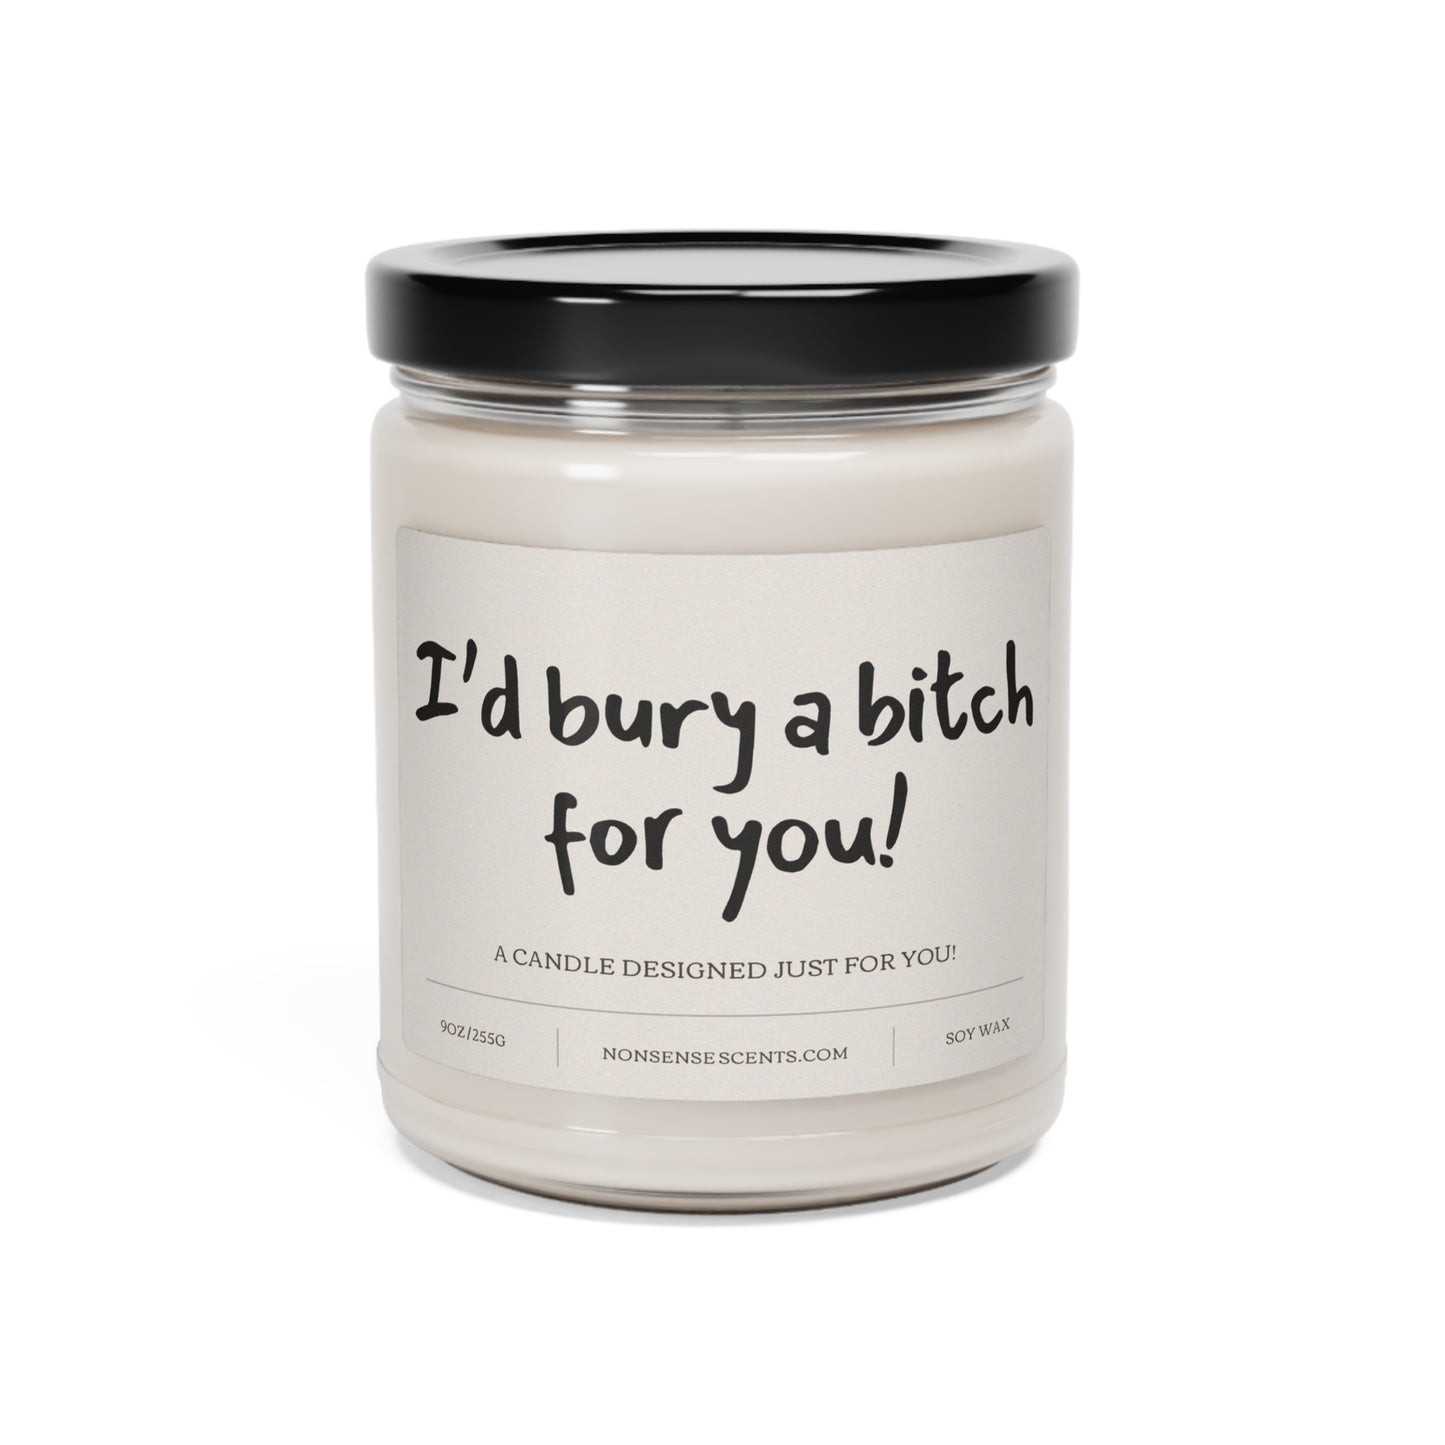 "I'd Bury A Bitch For You!" Scented Candle